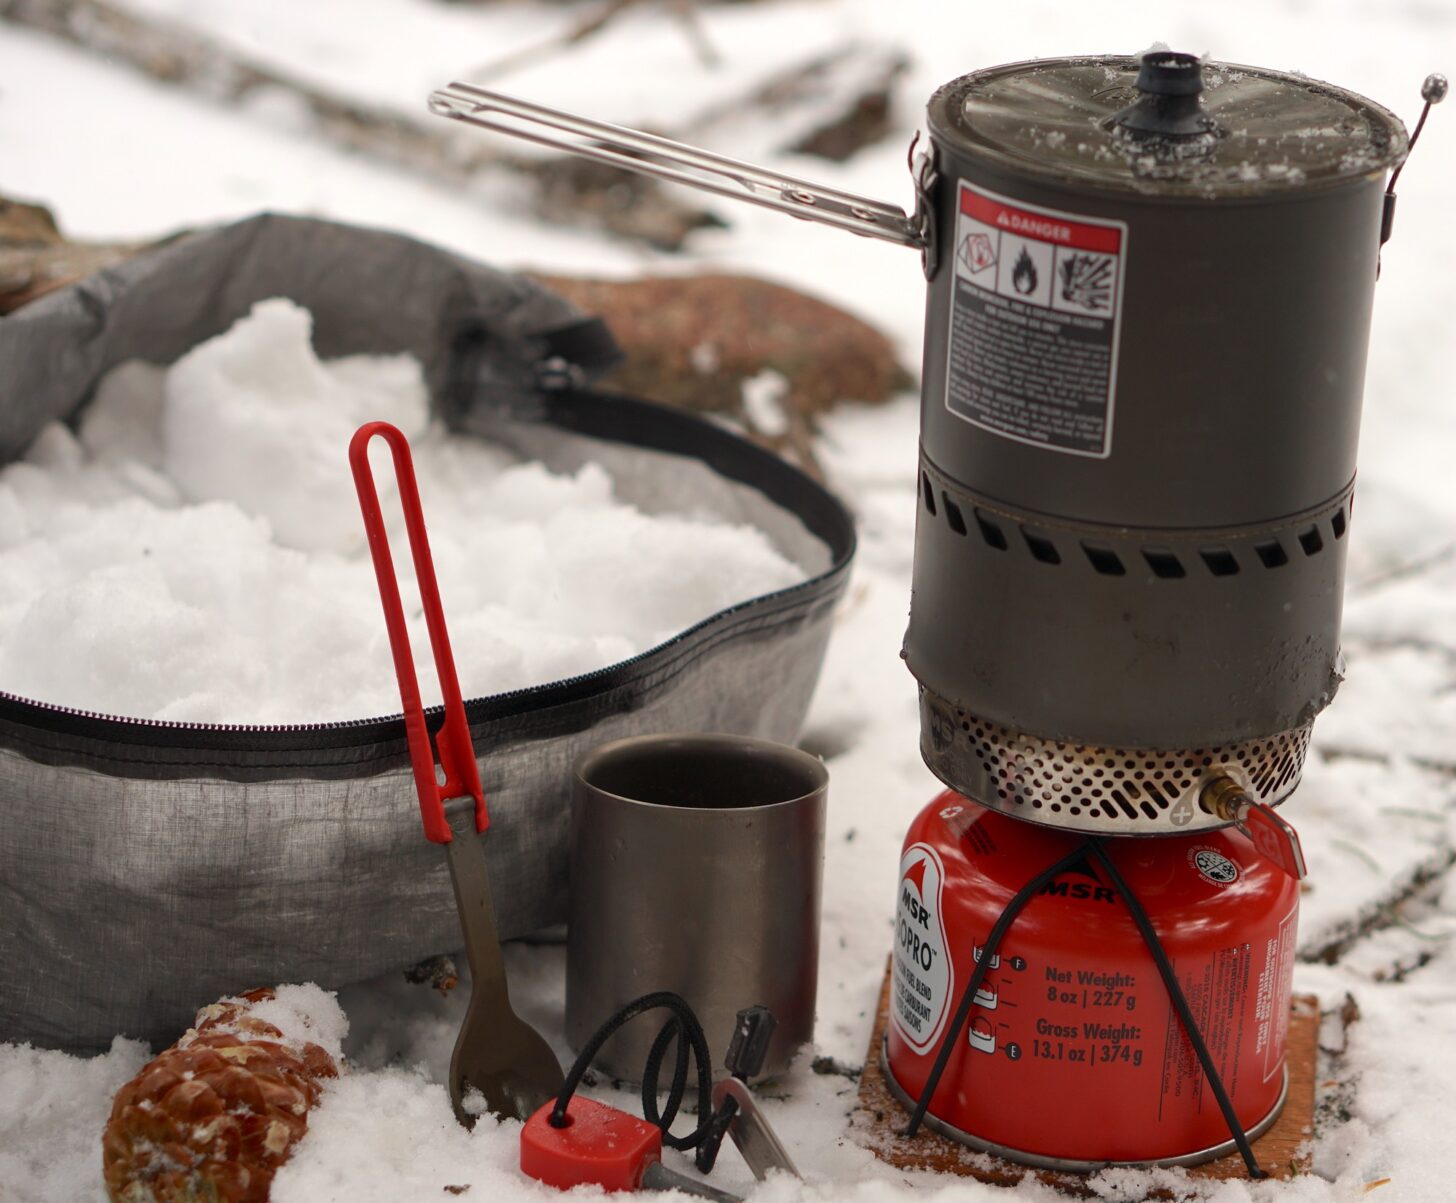 a stuff sack full of snow (to be used for melting to create water while cooking), a fuel canister, a canister stove, a titanium mug, a folding spoon, and a fire starting device